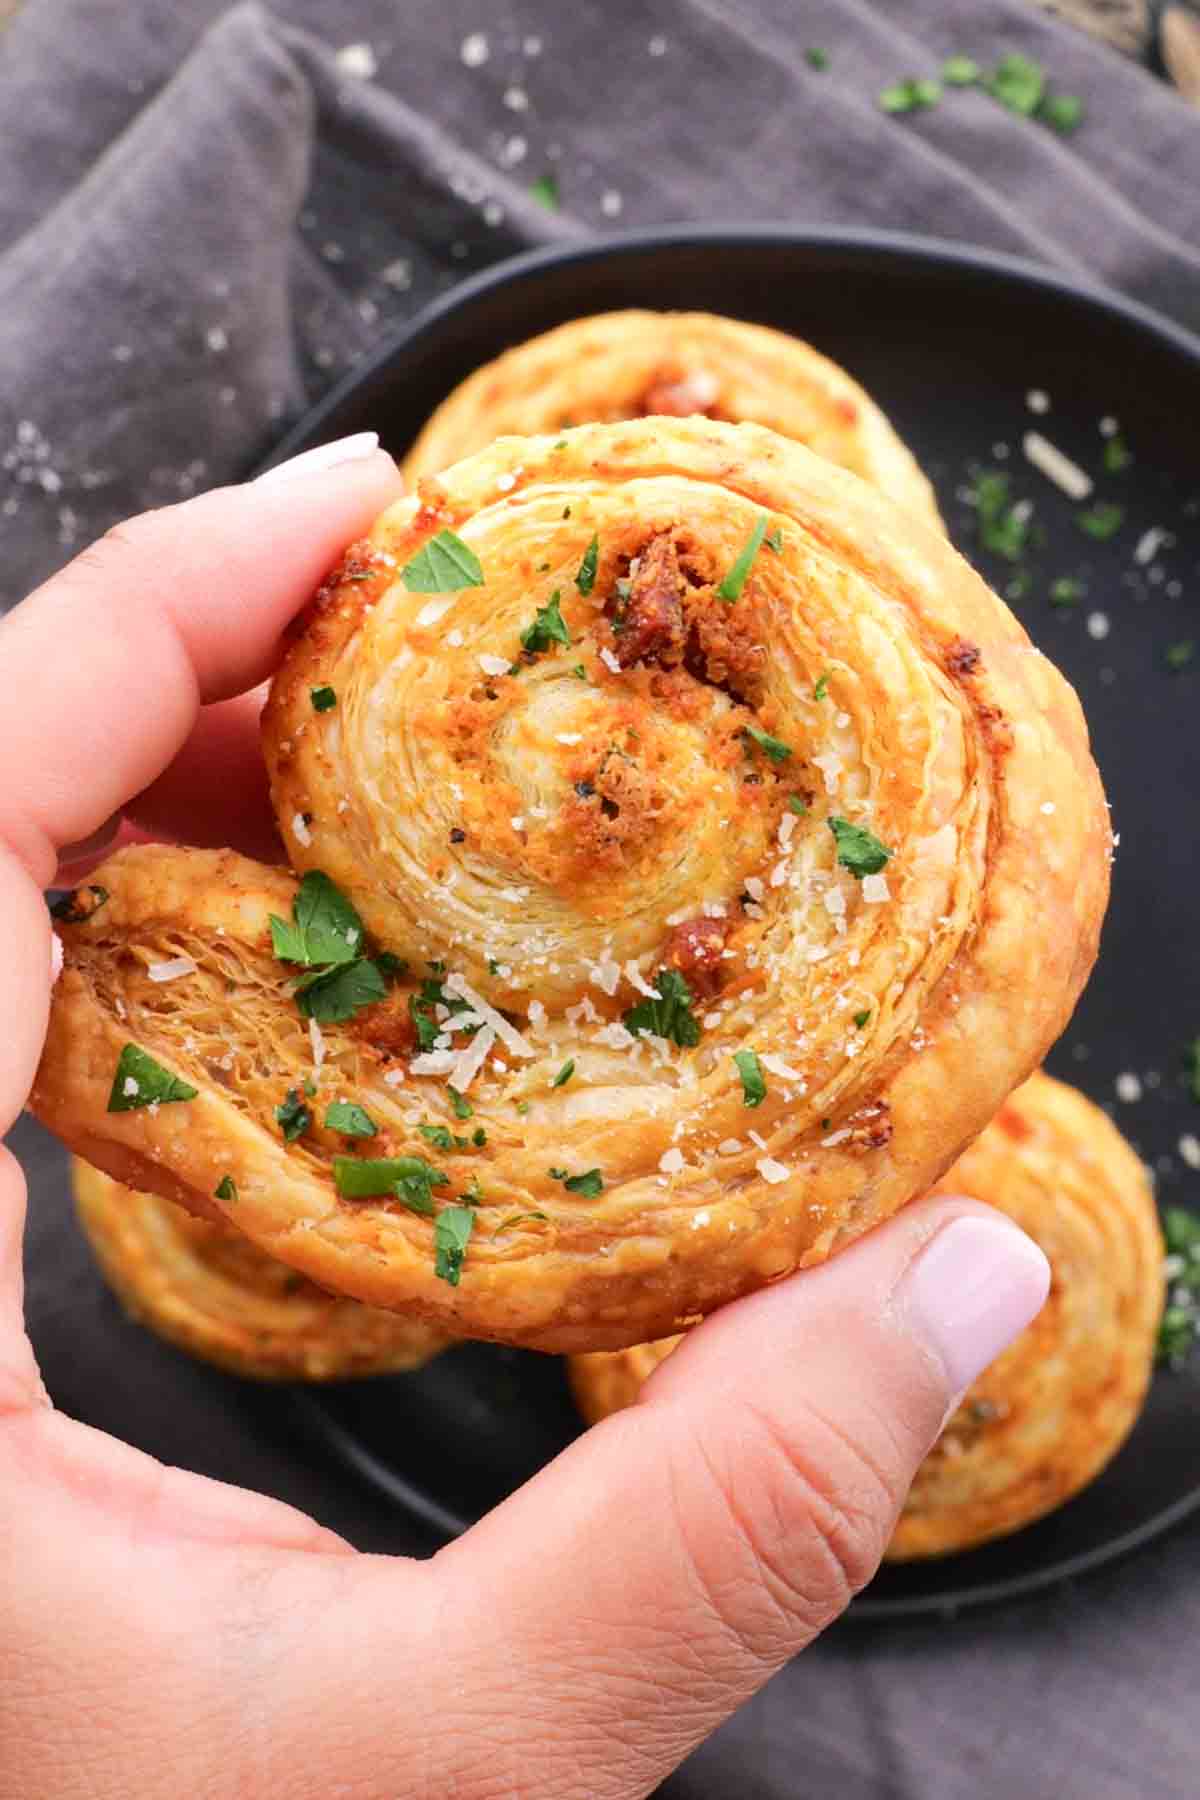 A hand holding a pastry with parmesan cheese and parsley.